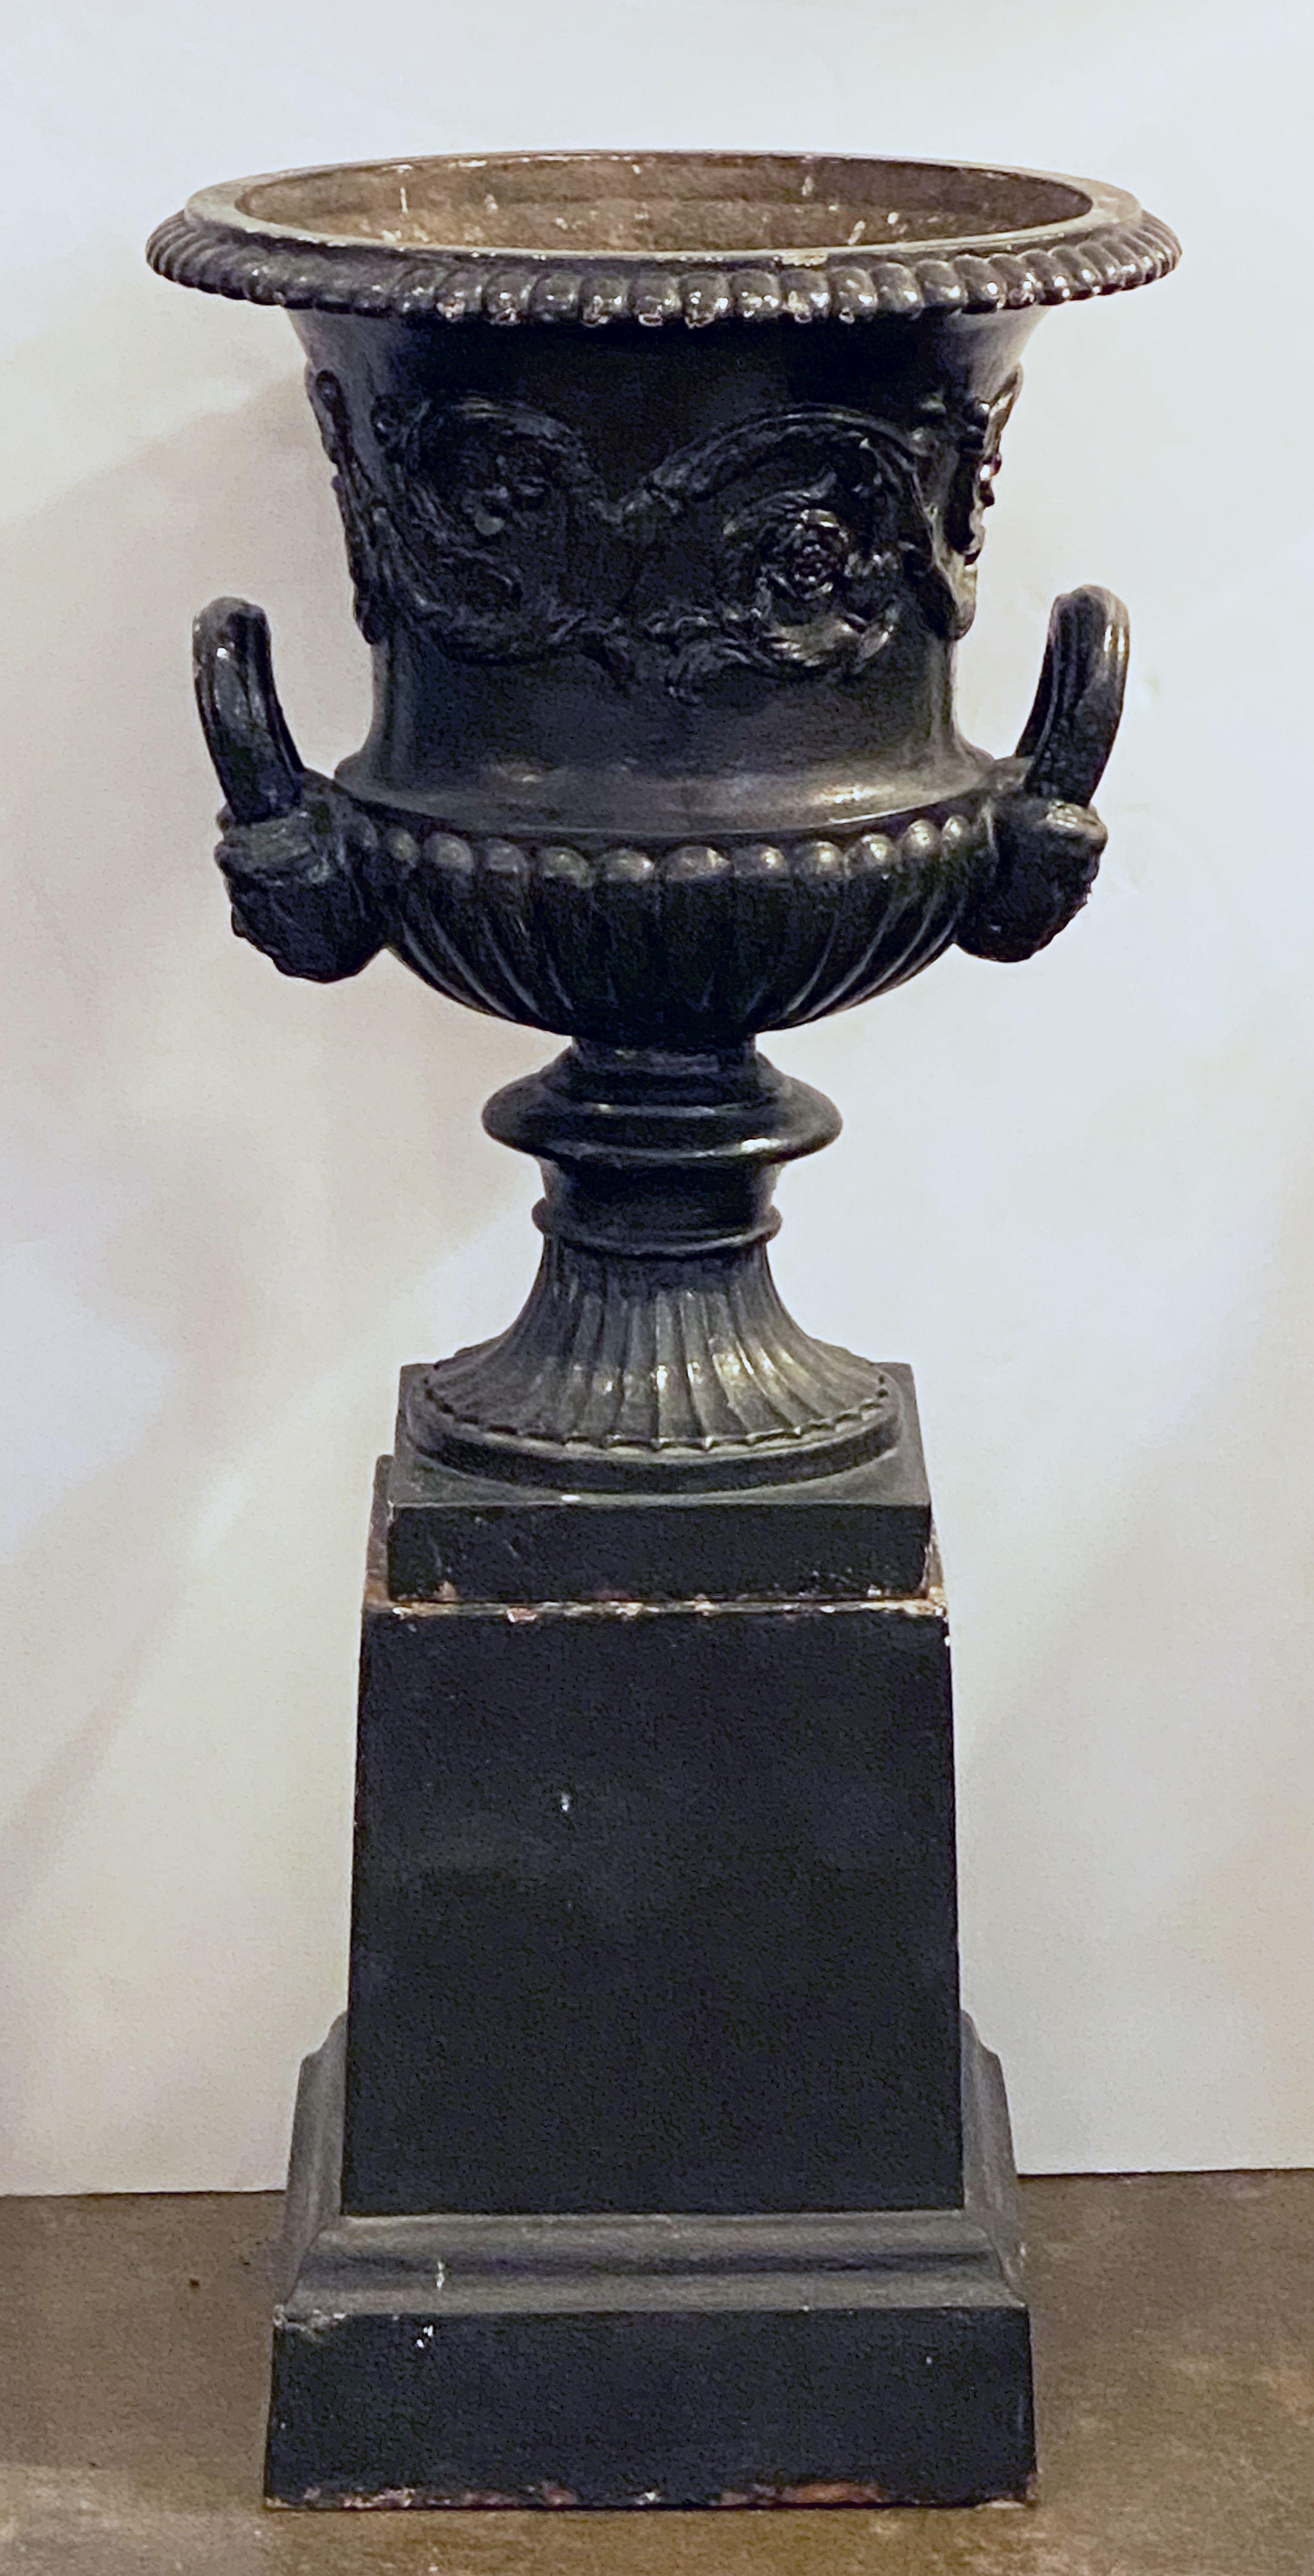 A fine pair of English cast iron urns (or garden planter pots) on plinths from the Regency Era, circa 1820s - each urn featuring a classical style design with everted dentil rim, quarter-lobed body with foliate relief, and flared masked handles on